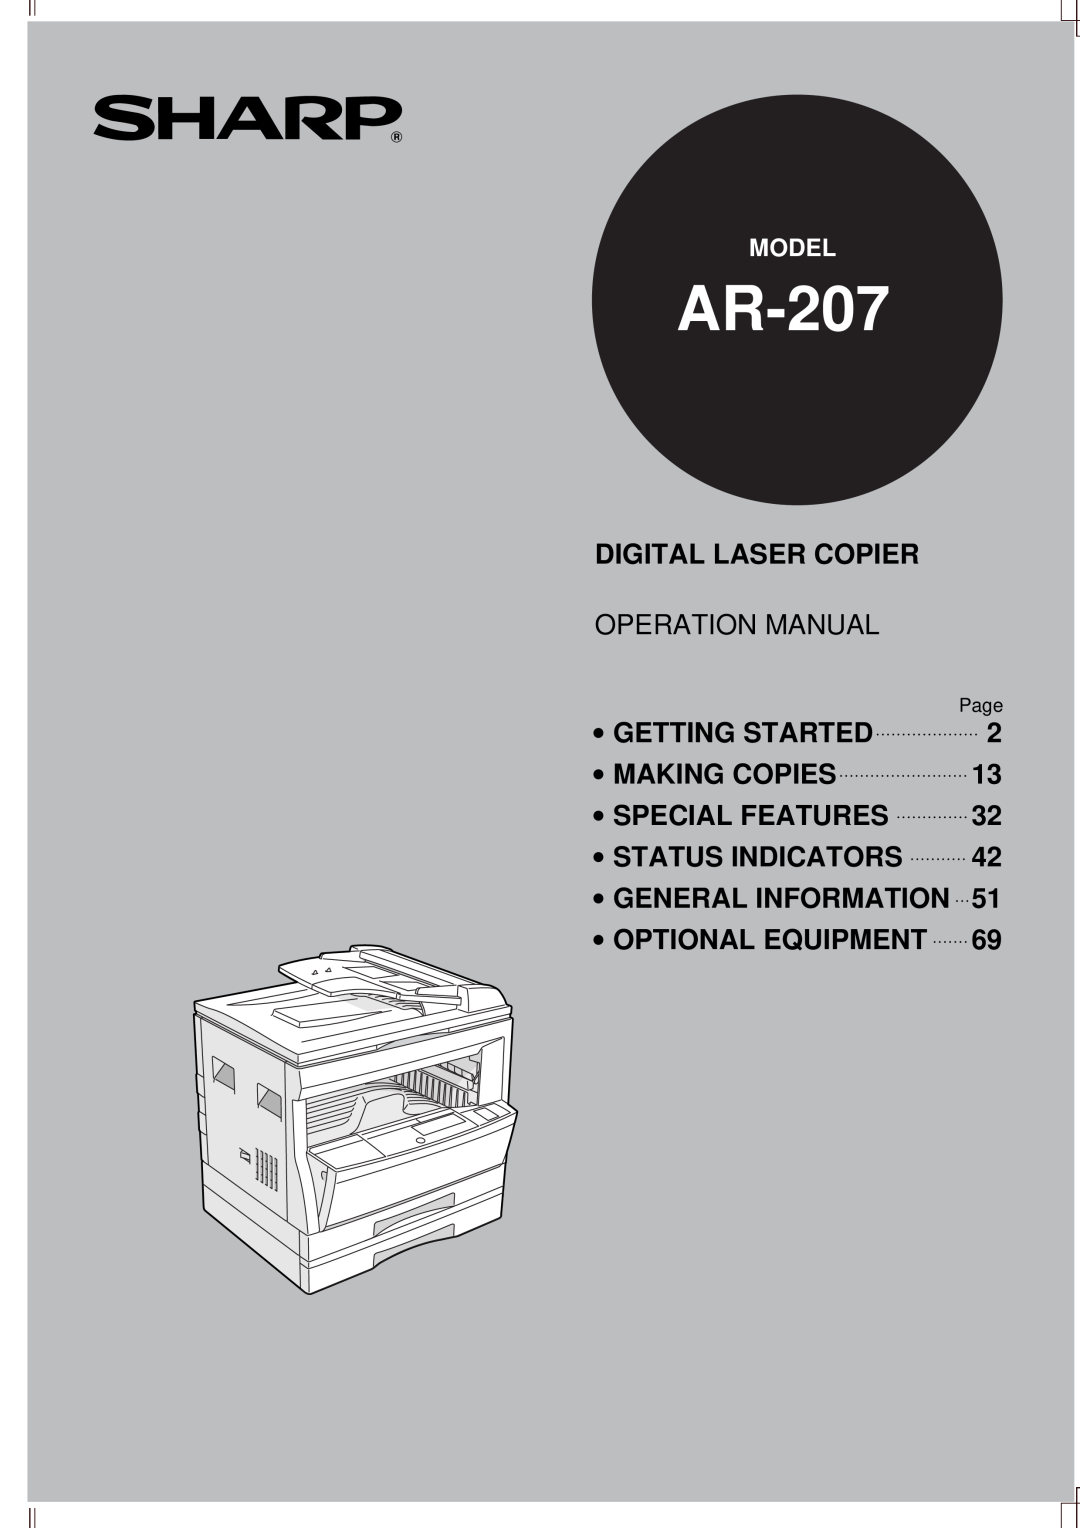 Sharp AR-207 operation manual Model, Page, Digital Laser Copier, Operation Manual, ∙ Getting Started, ∙ Making Copies 